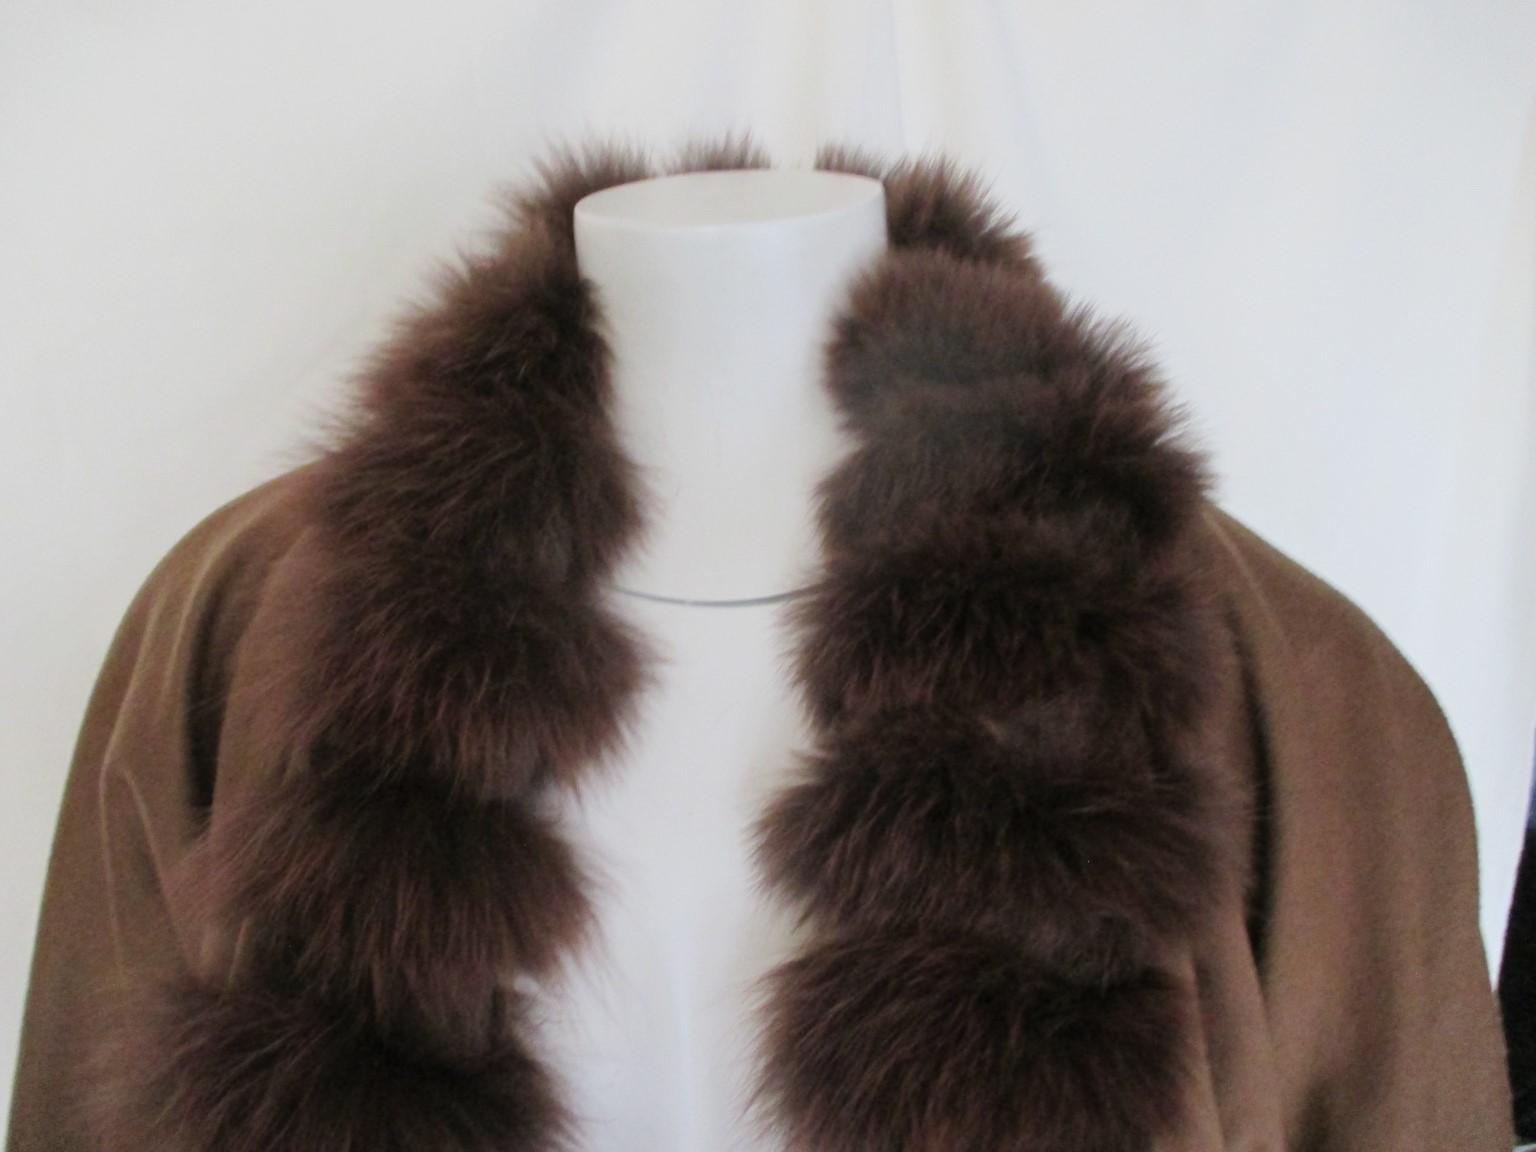 This exclusive vintage cape with sleeves is trimmed with soft fur.

 We offer more luxury fur items, view our frontstore.

Details:
With 2 pockets, 3 closing hooks and sleeves
Its made of a blend wool and cashmere
the fur is trimmed around the